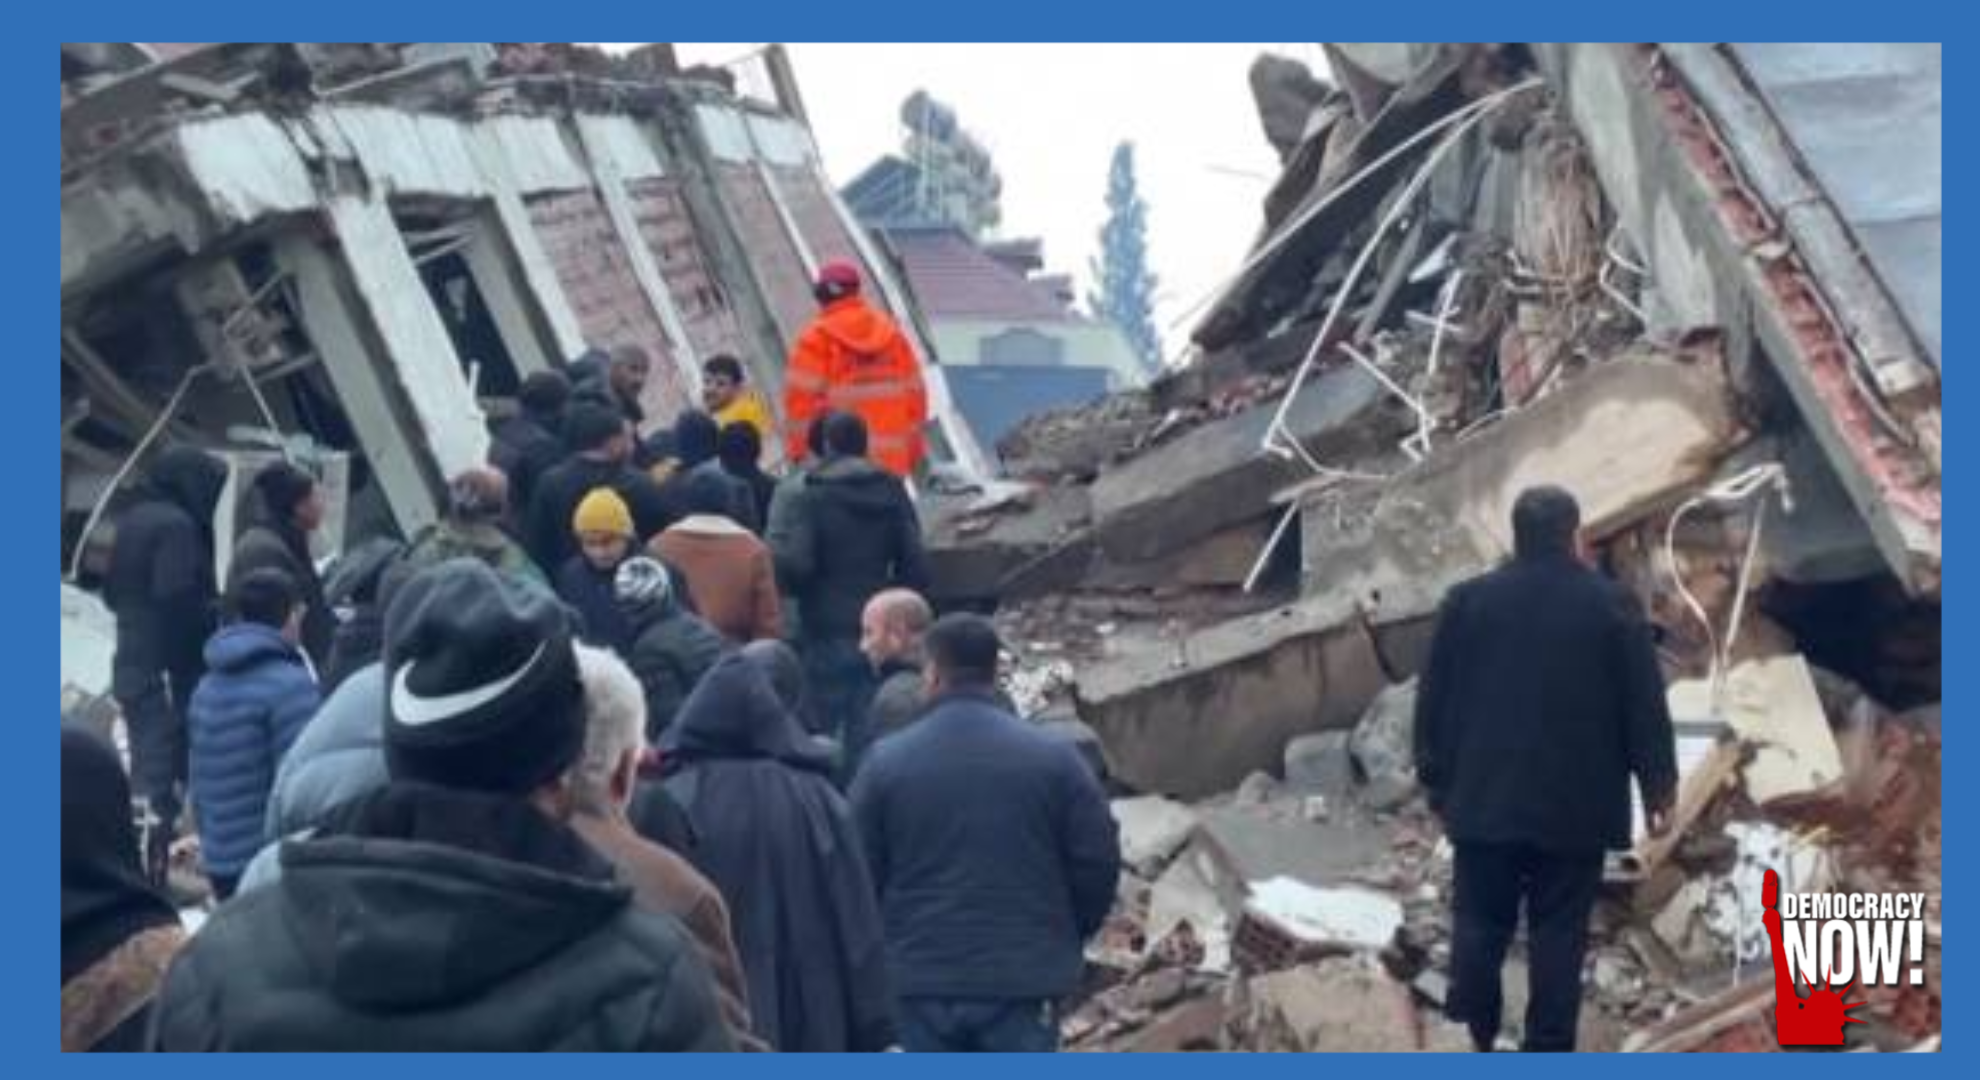 Over 5,000 Dead in Turkey and Syria as Earthquakes Devastate Region Filled with Refugees Fleeing War